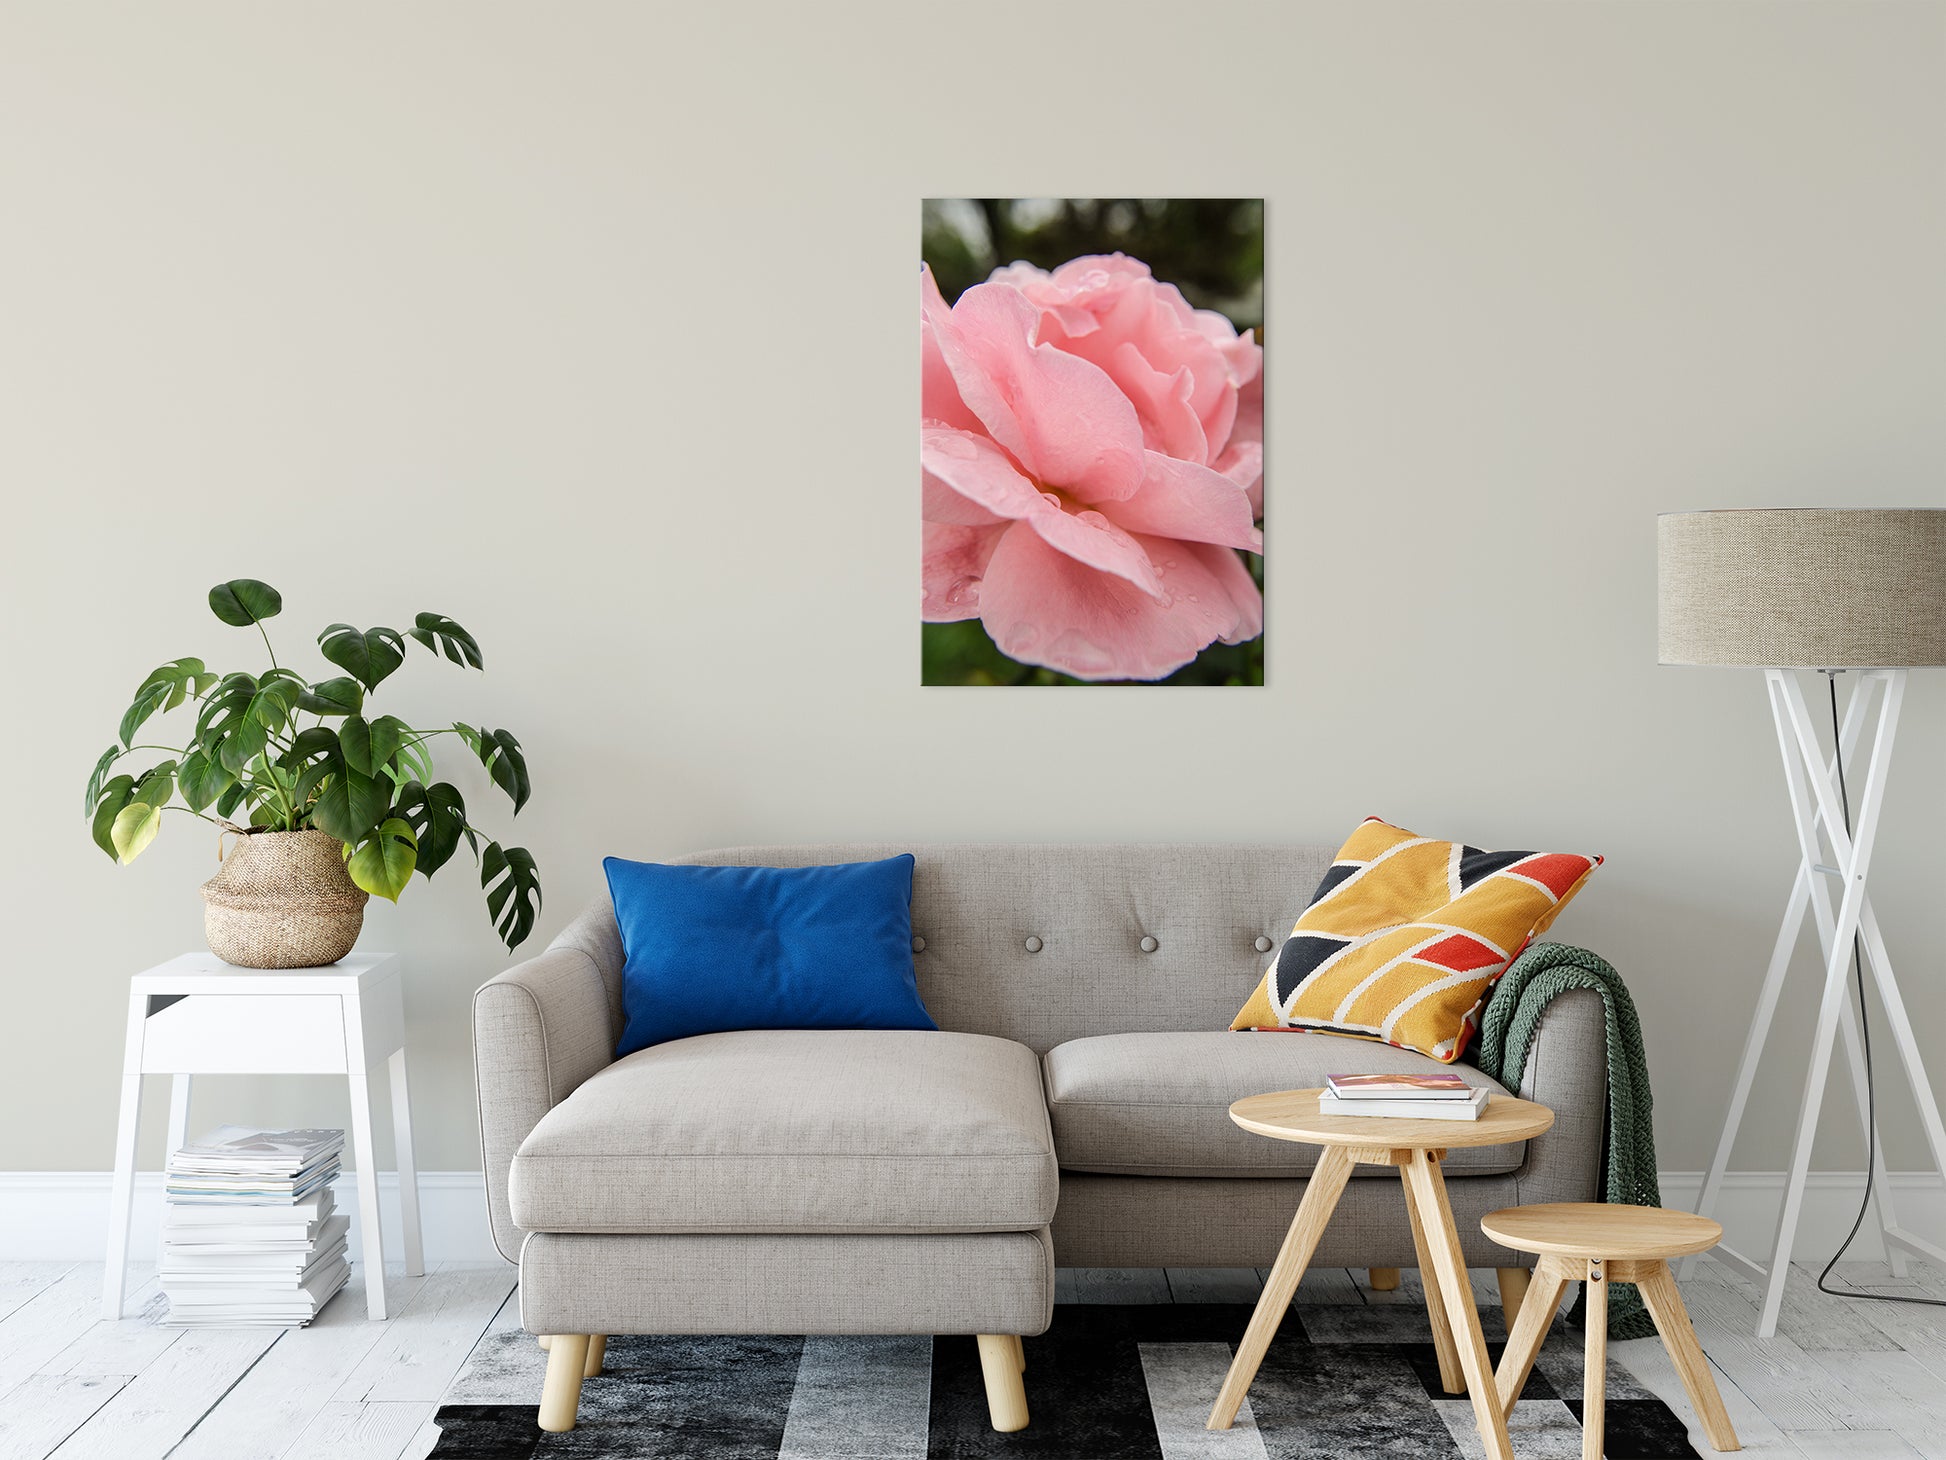 Pink Passion Nature / Floral Photo Fine Art Canvas Wall Art Prints 24" x 36" - PIPAFINEART